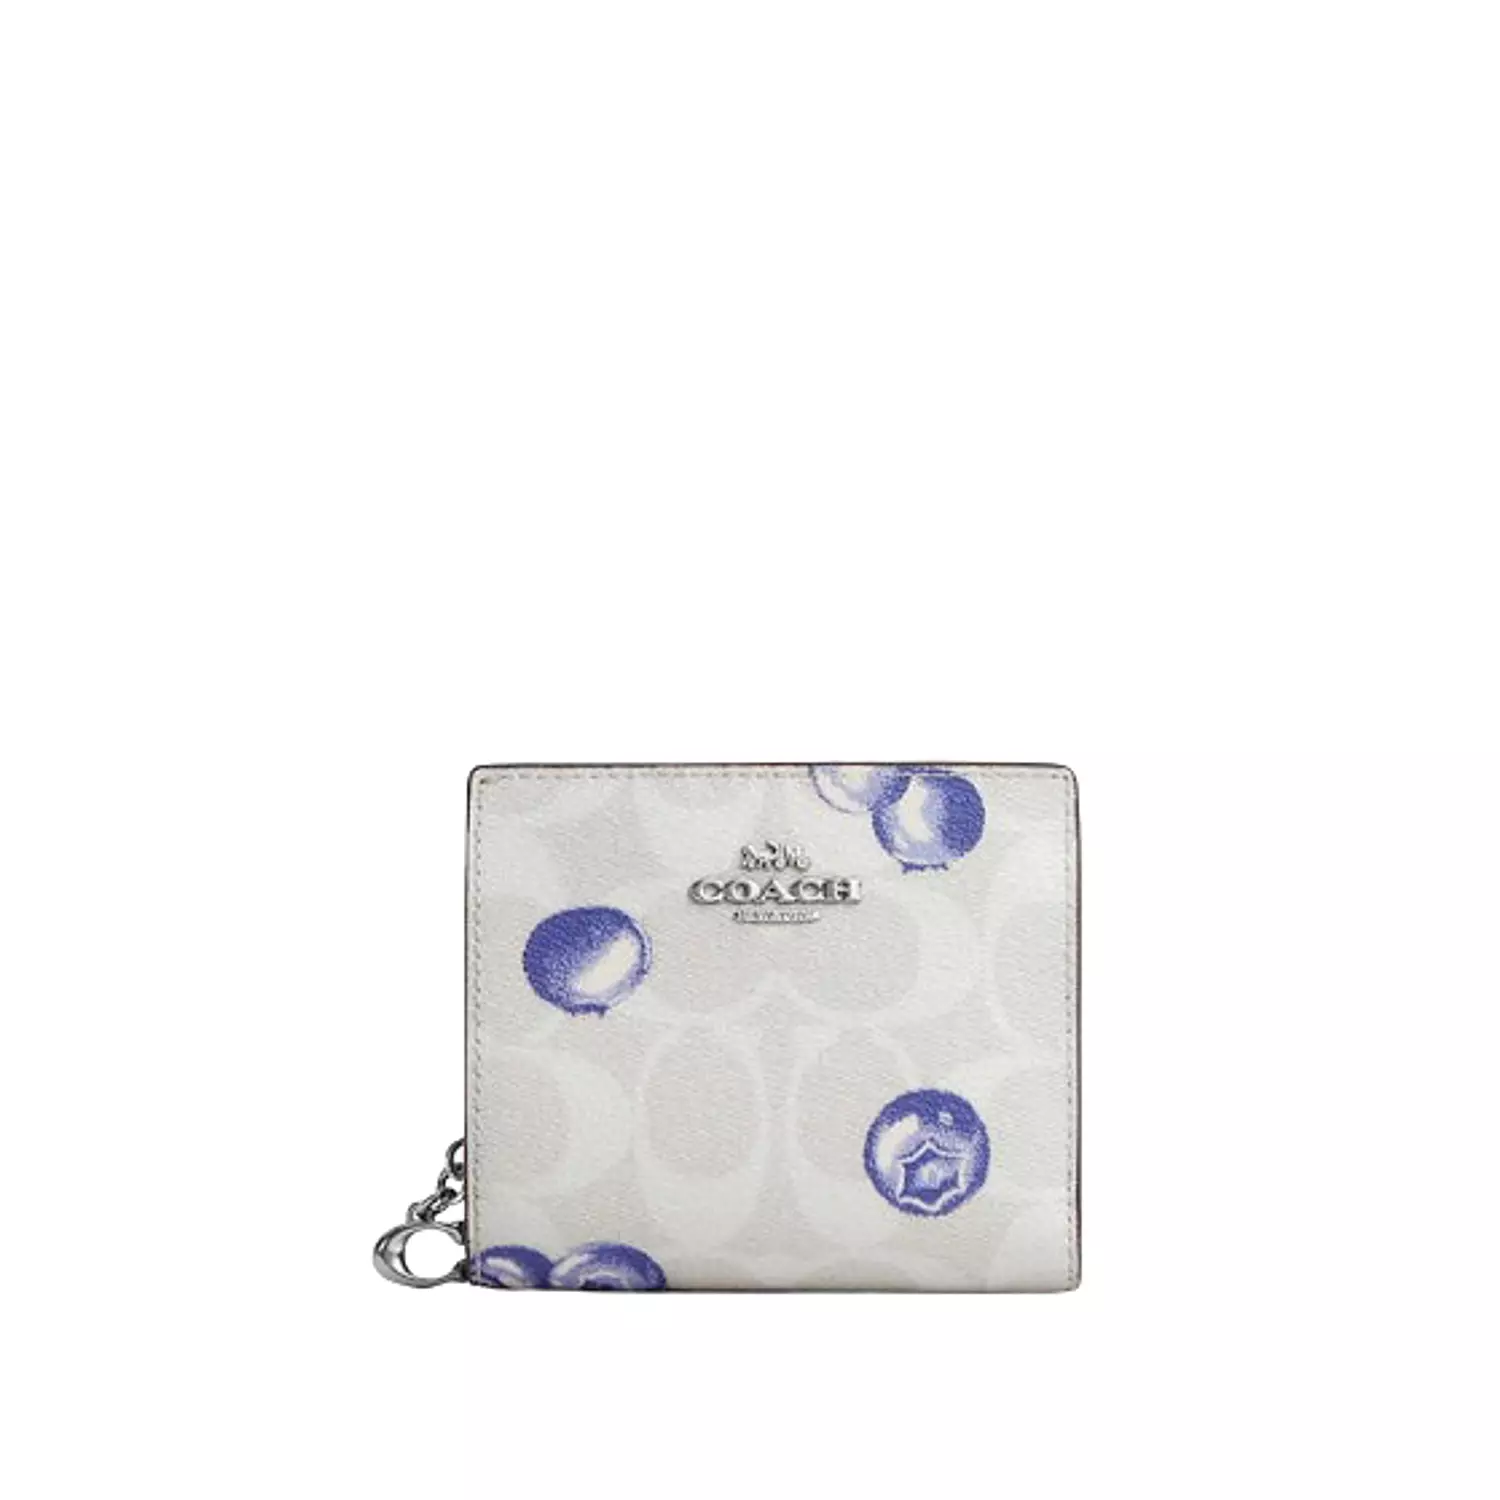 Coach Snap Wallet in Berries Print hover image